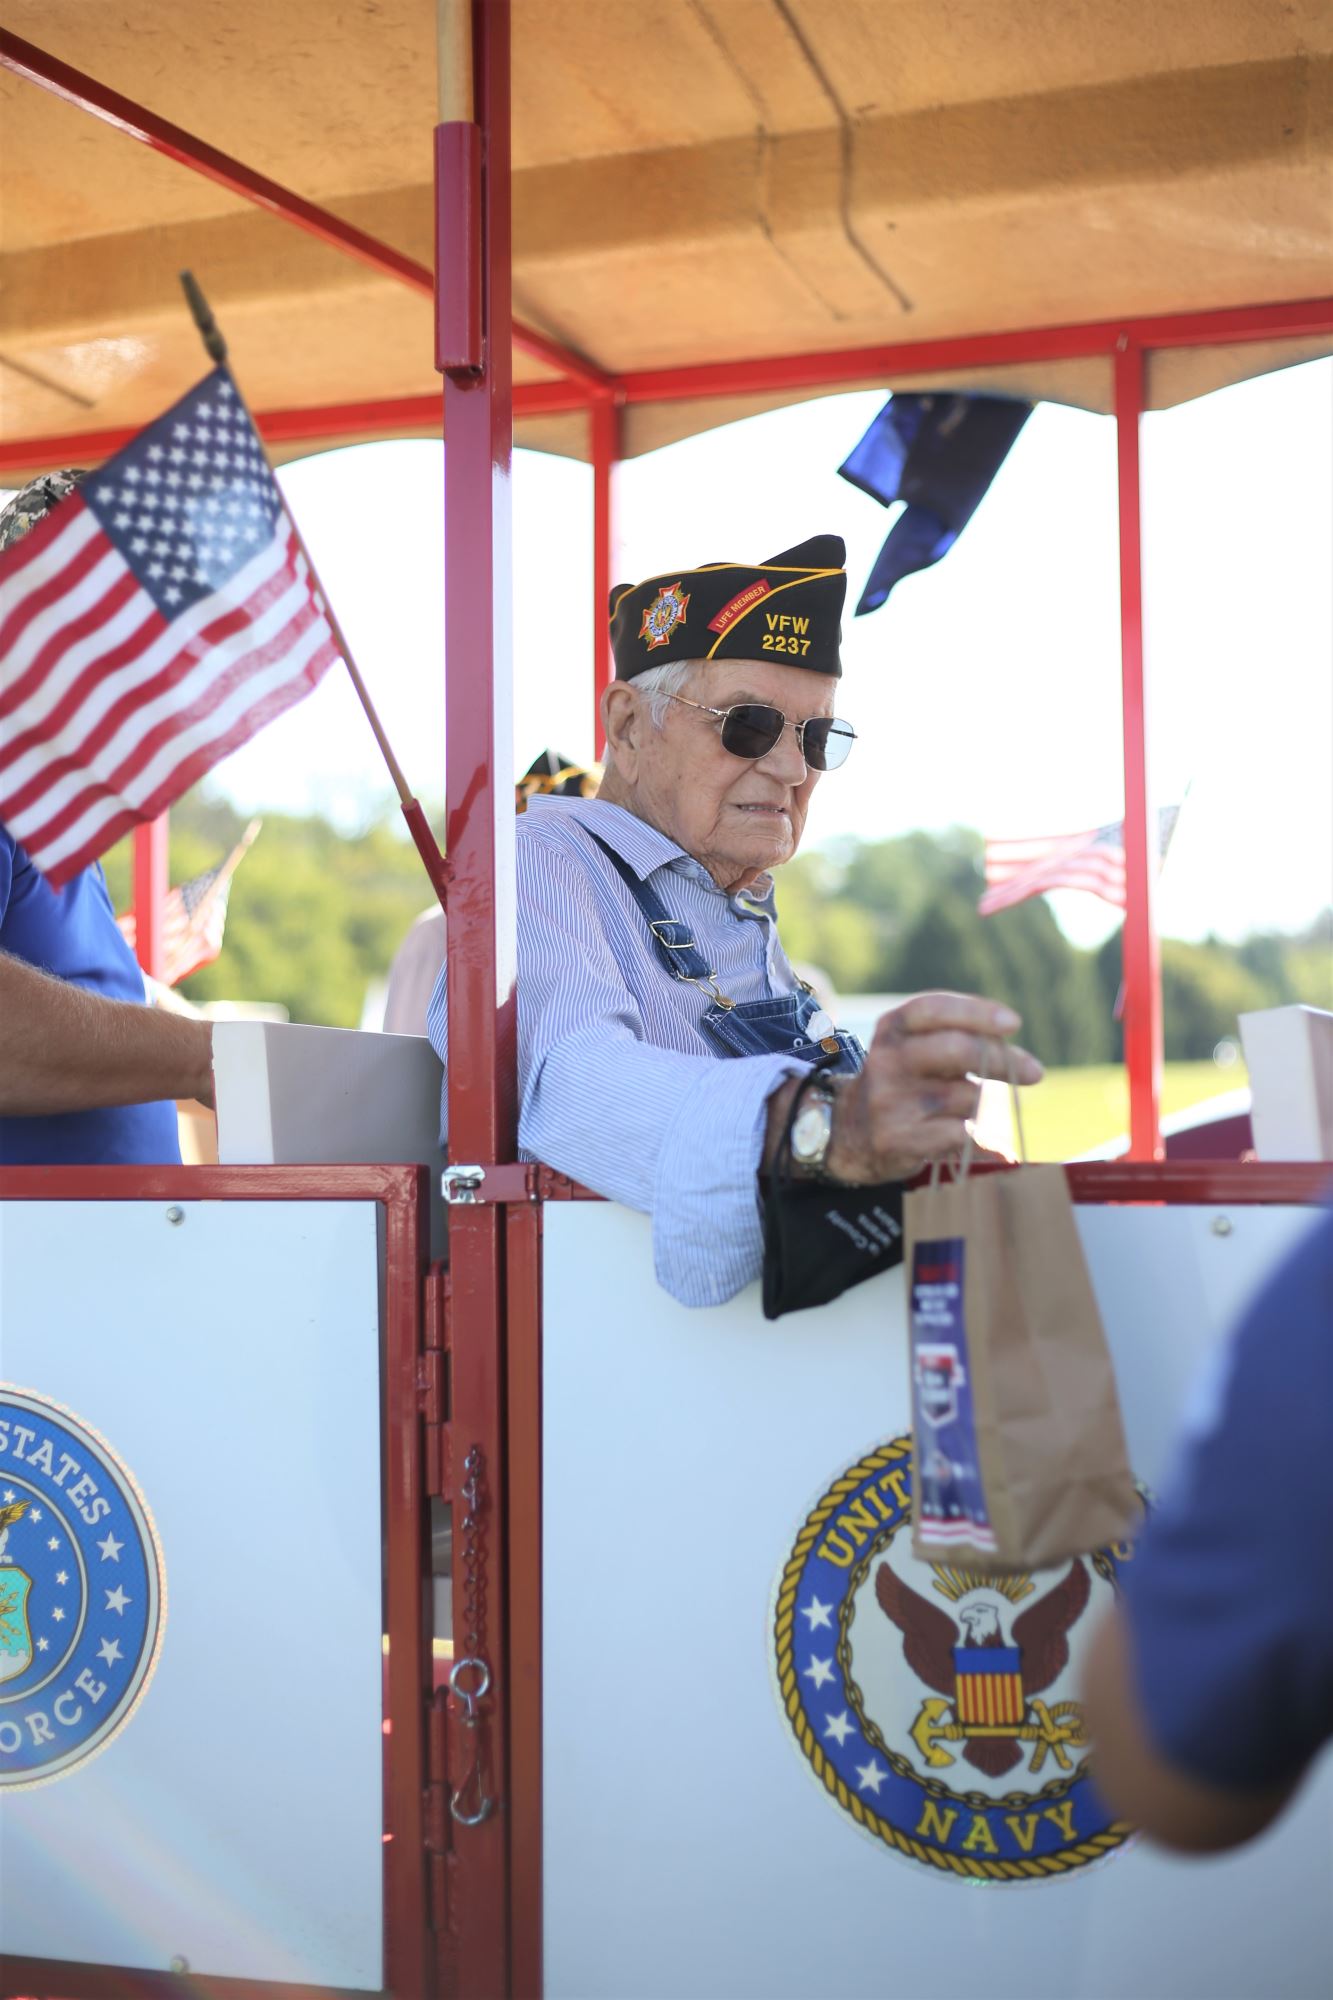 Veteran sits on trolley and grabs a bag of food.